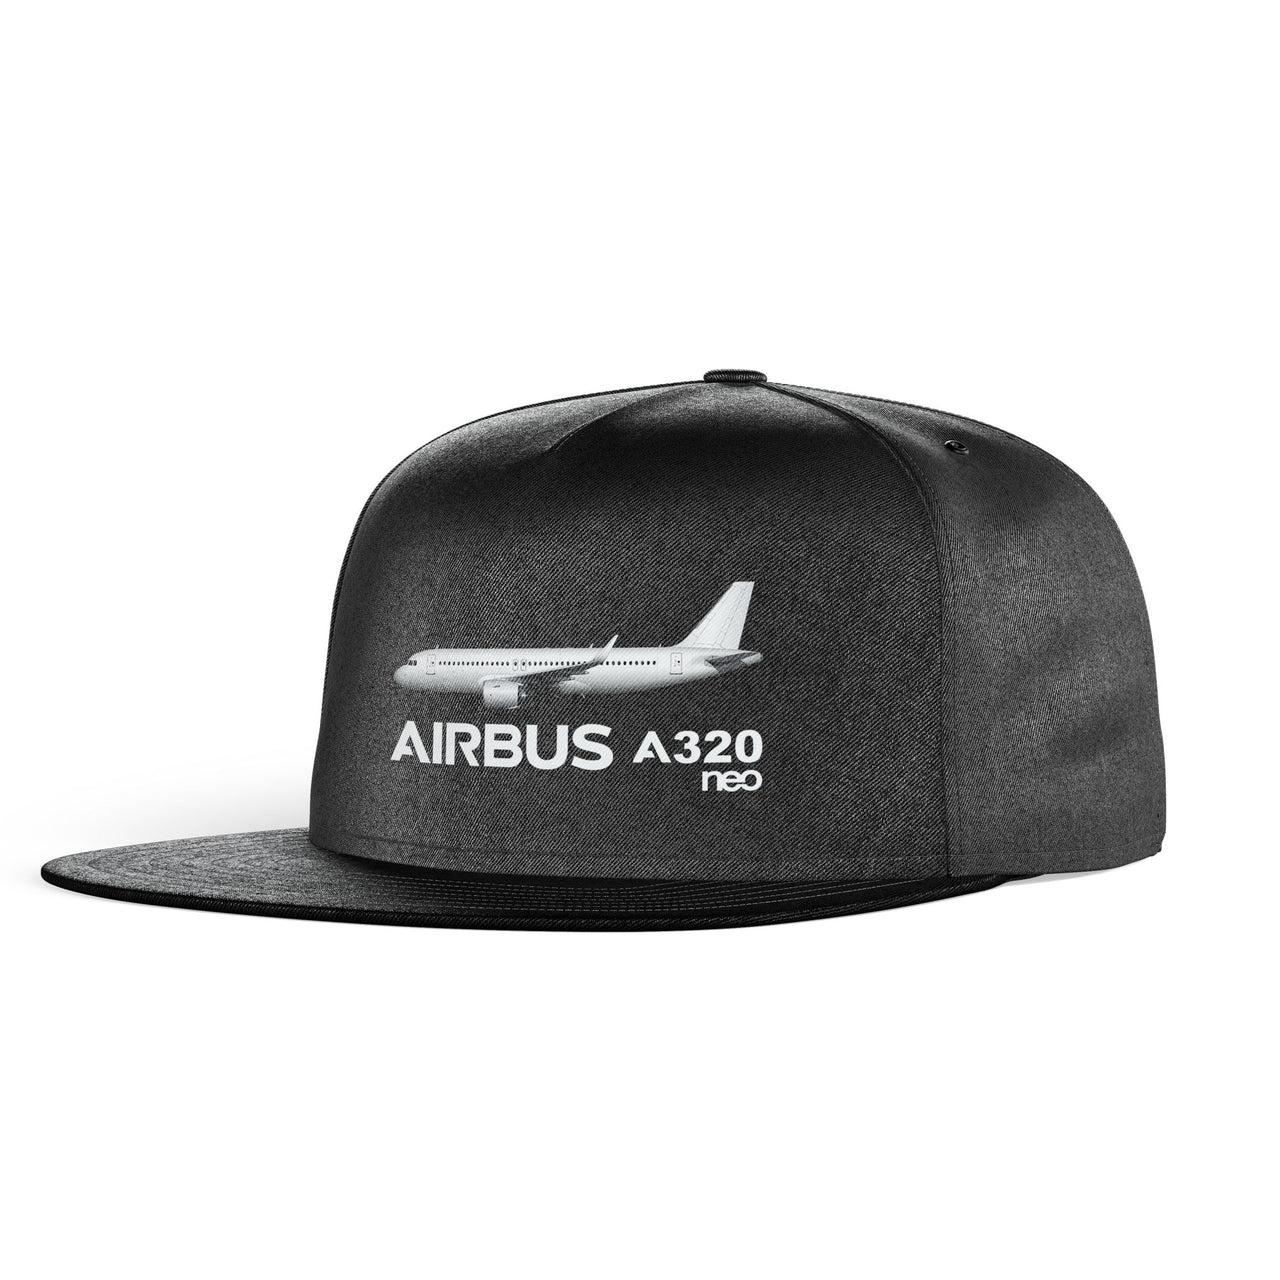 The Airbus A320Neo Designed Snapback Caps & Hats